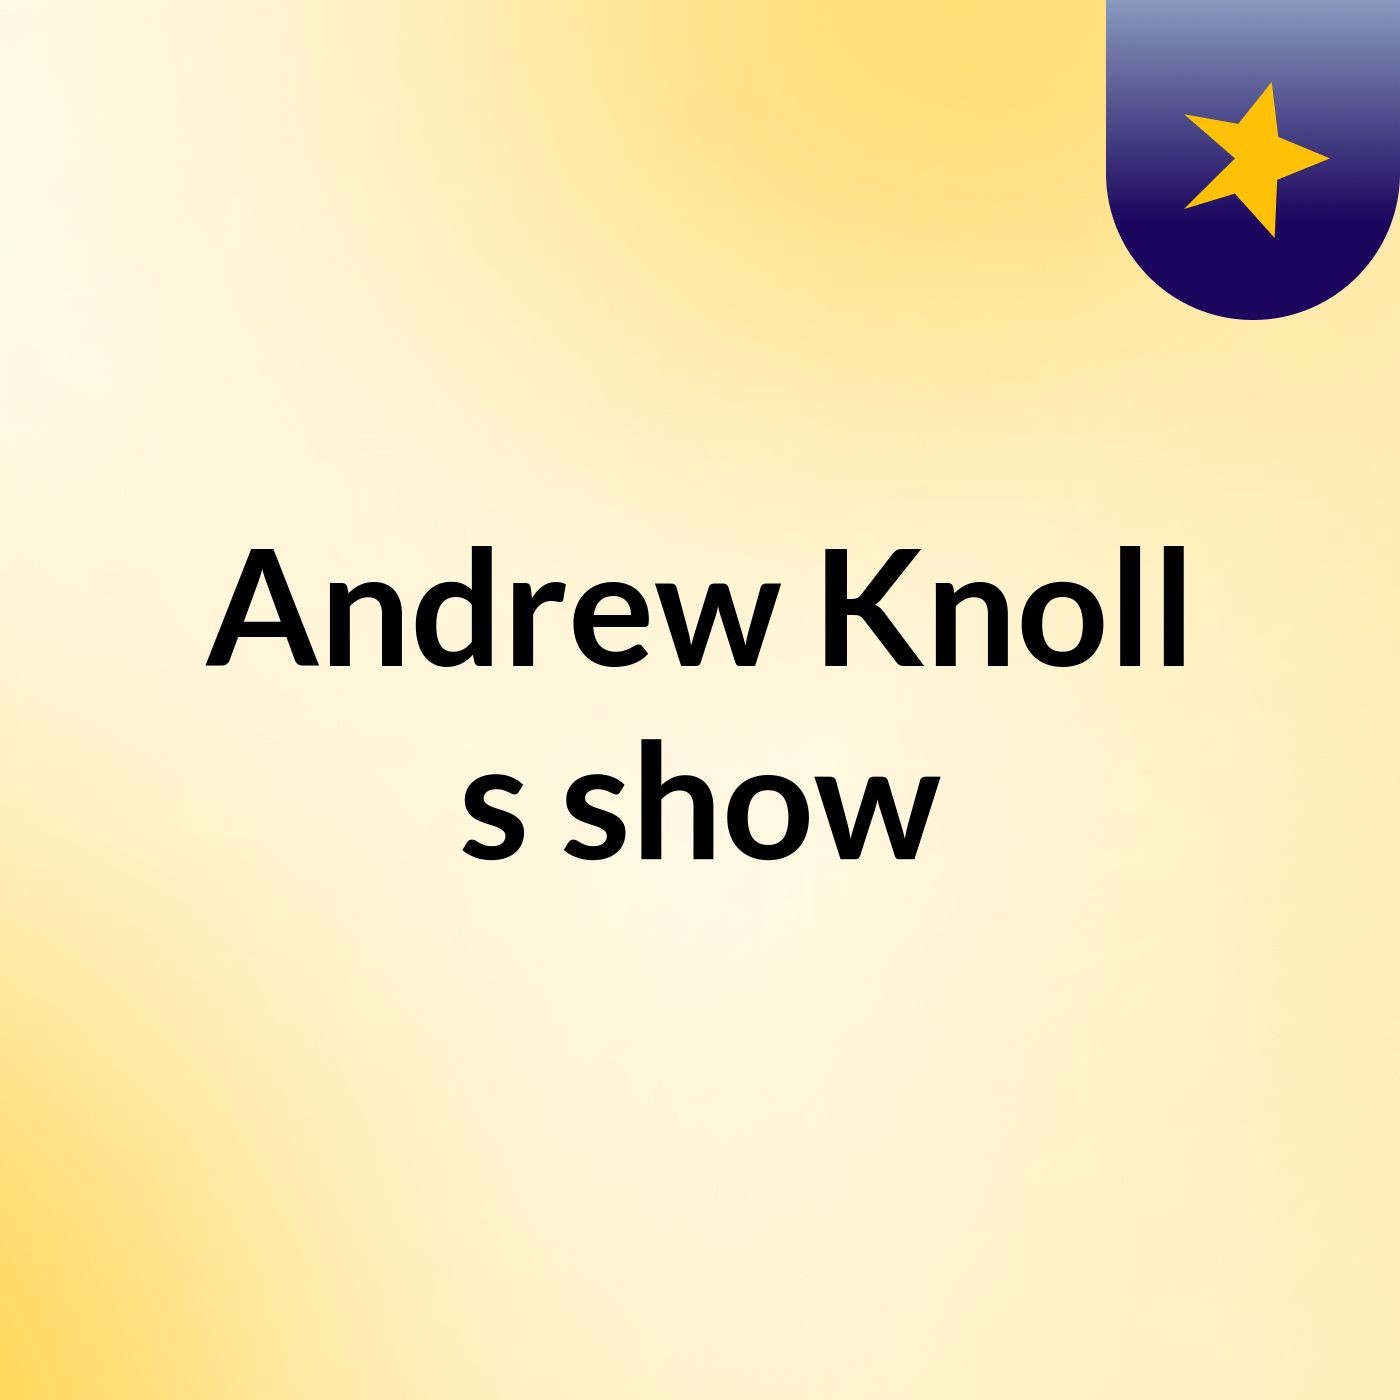 Andrew Knoll's show